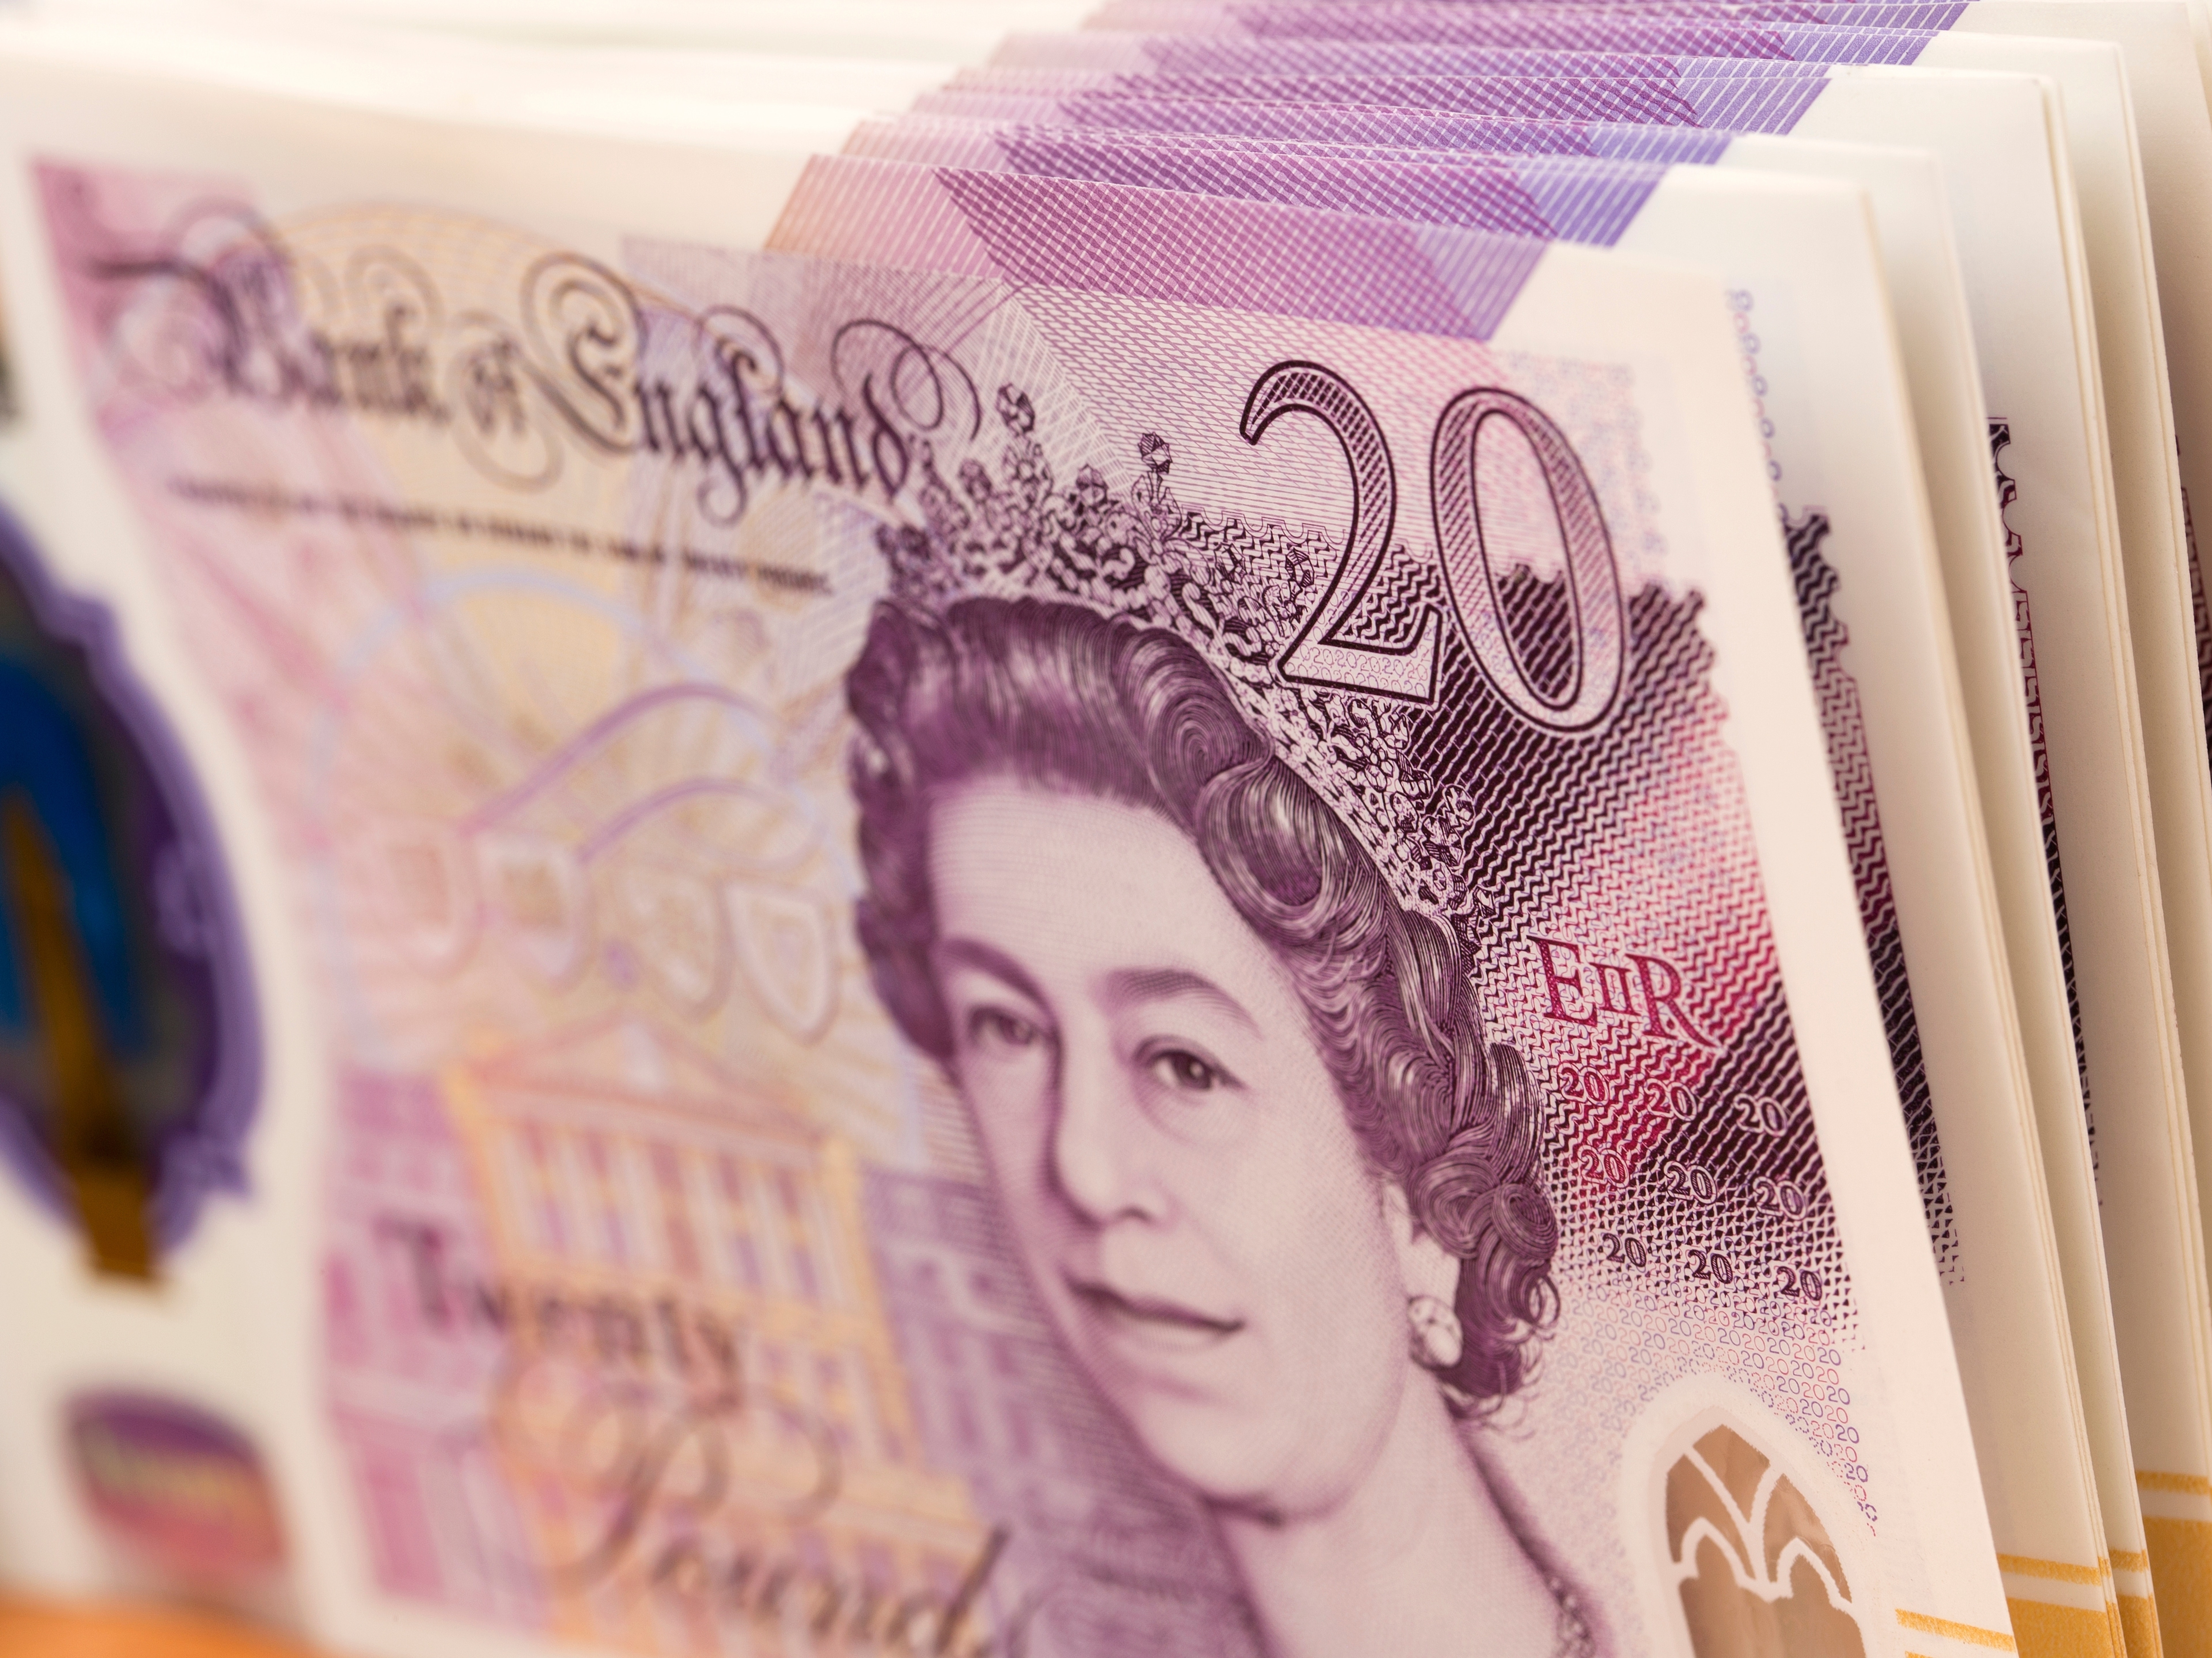 UK Bank Notes With Queen Elizabeth&#39;s Image: Will They Remain Legal Tender?